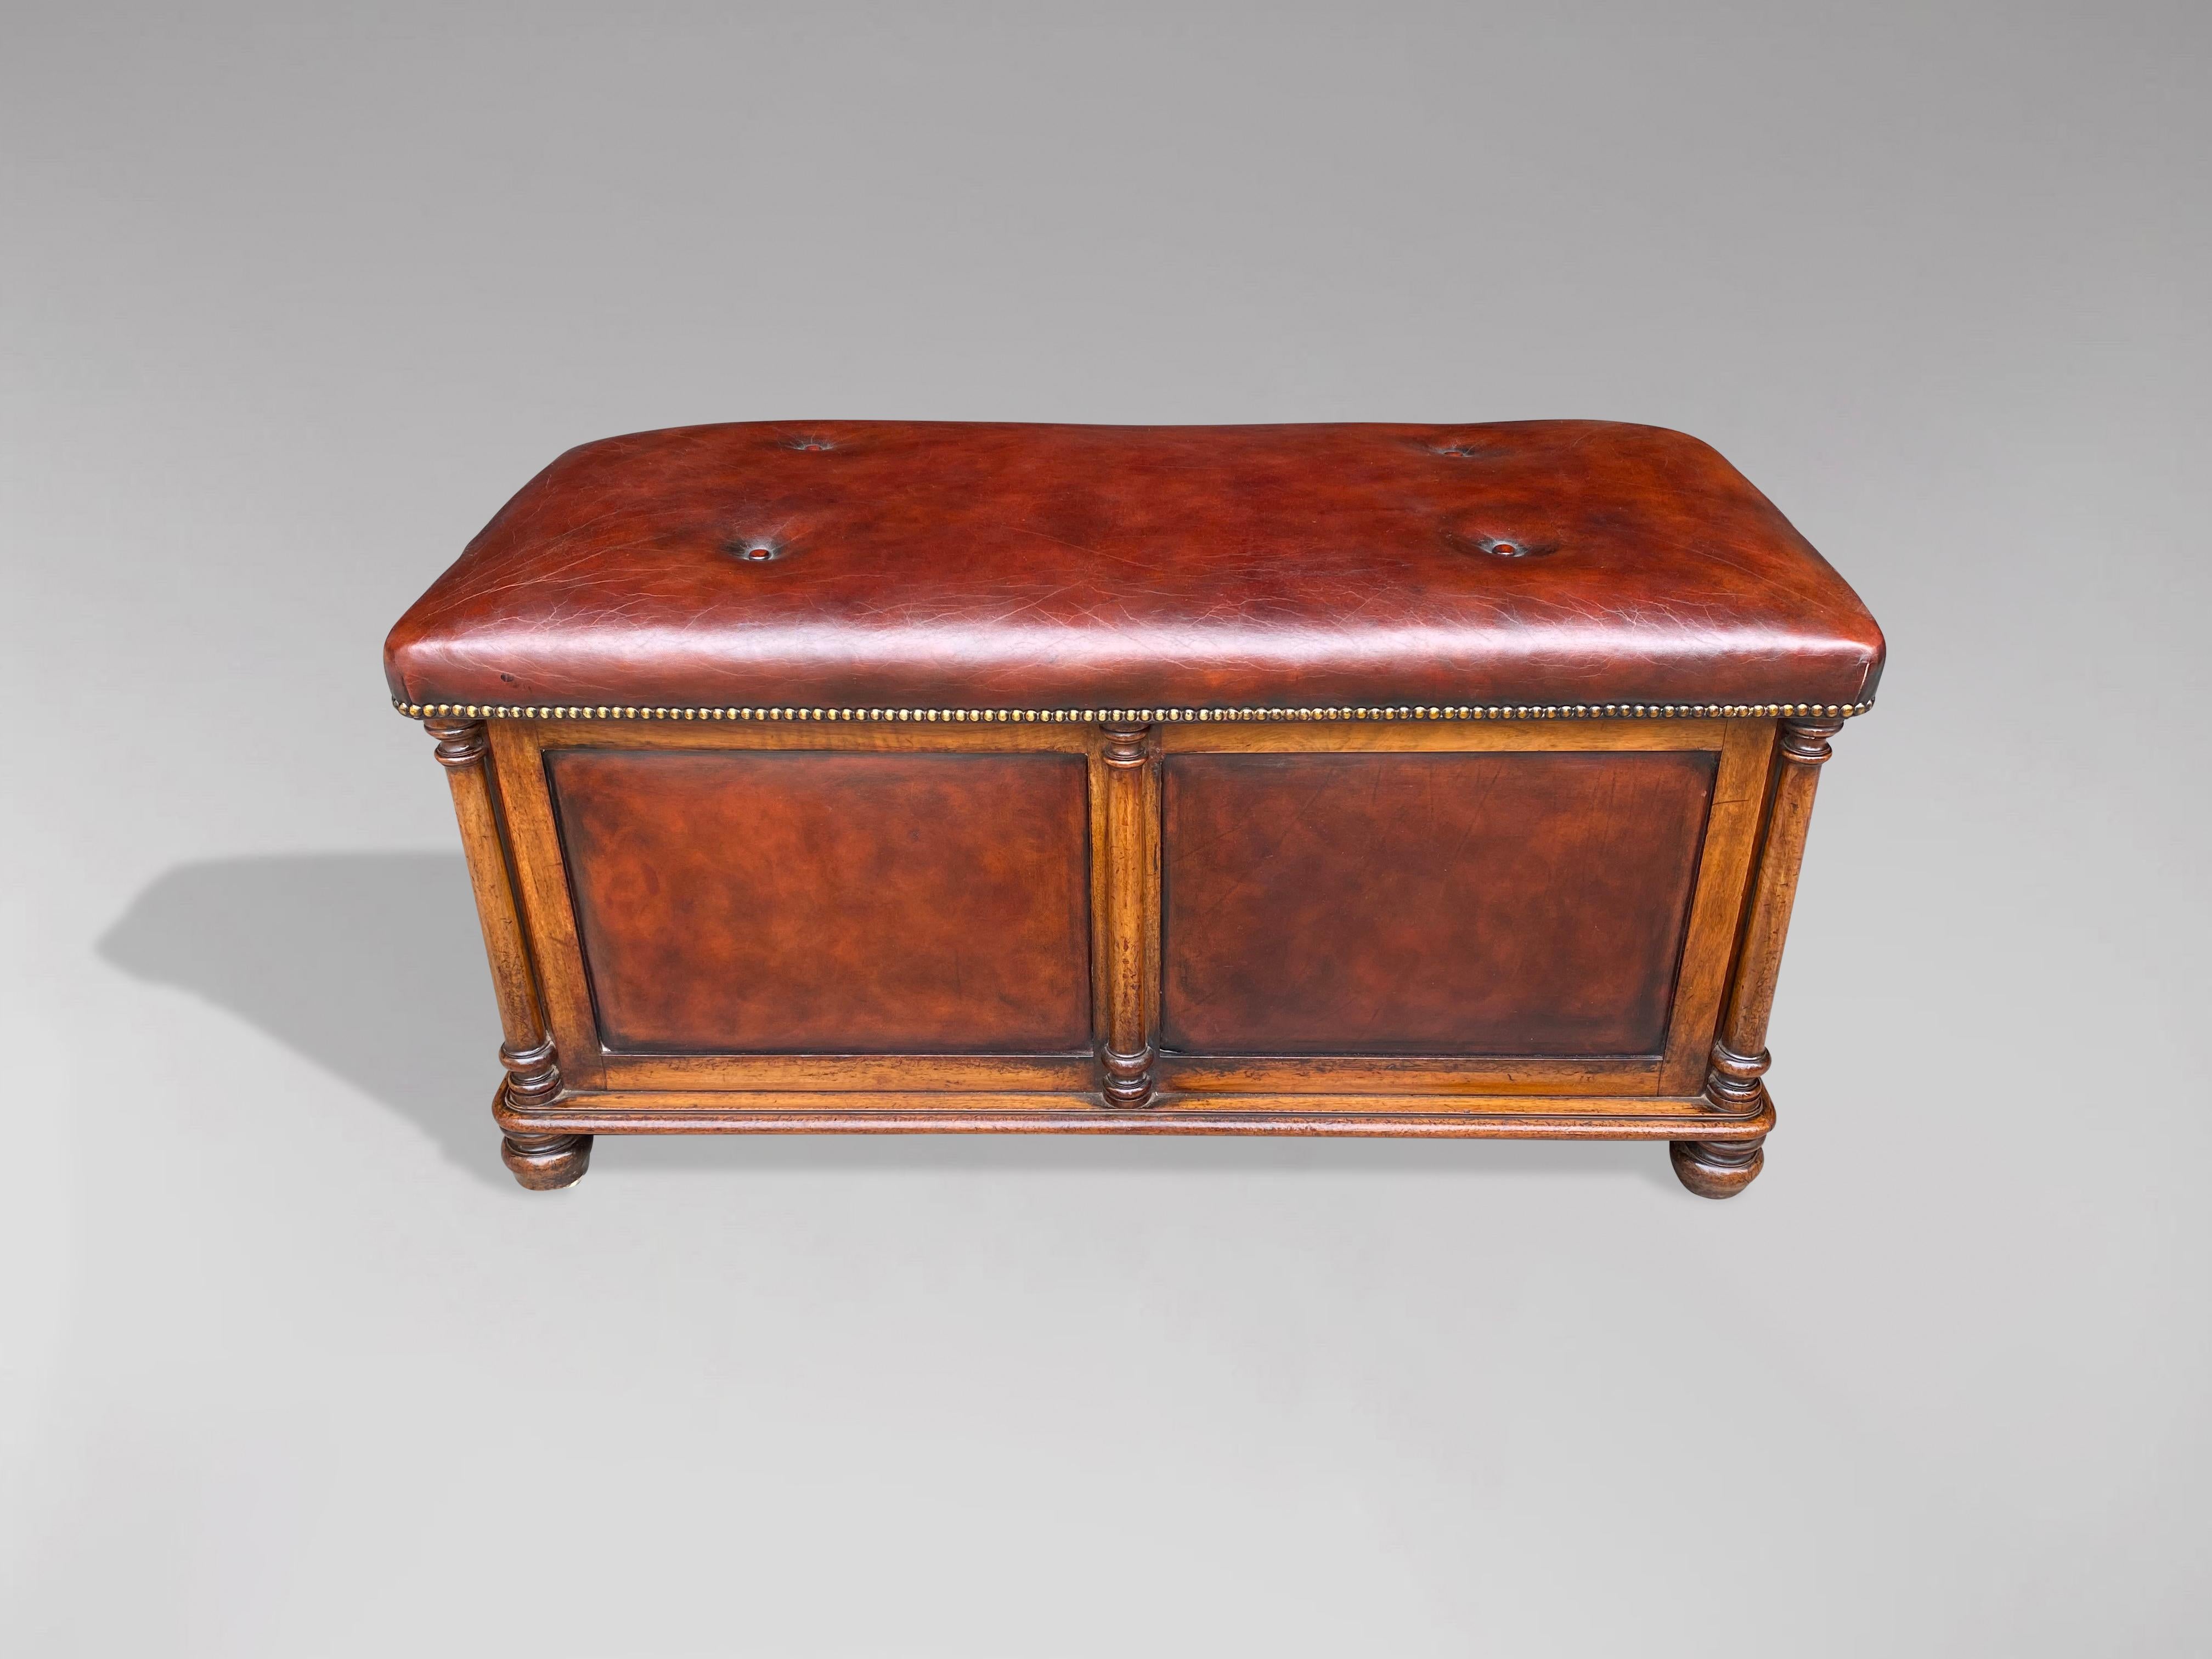 Hand-Crafted 19th Century, William IV Period Walnut and Leather Ottoman For Sale